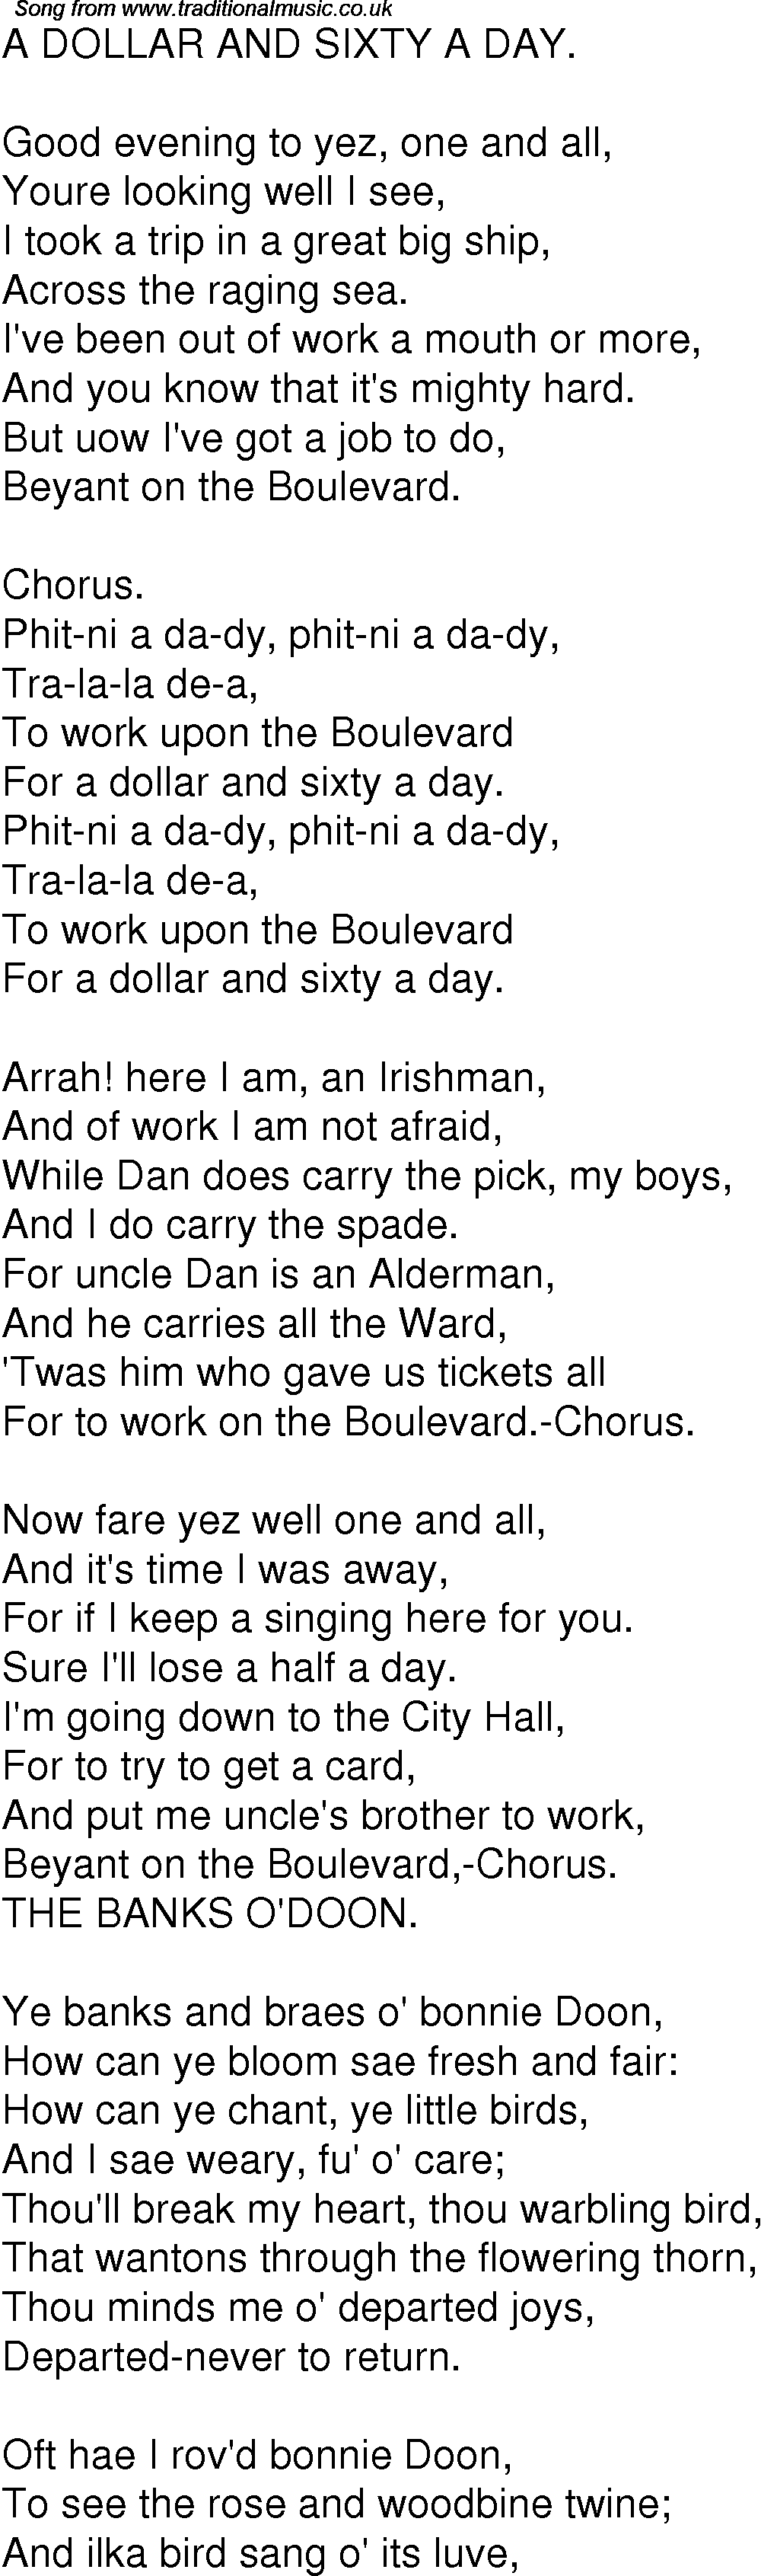 Old Time Song Lyrics for 07 A Dollar And Sixty A Day